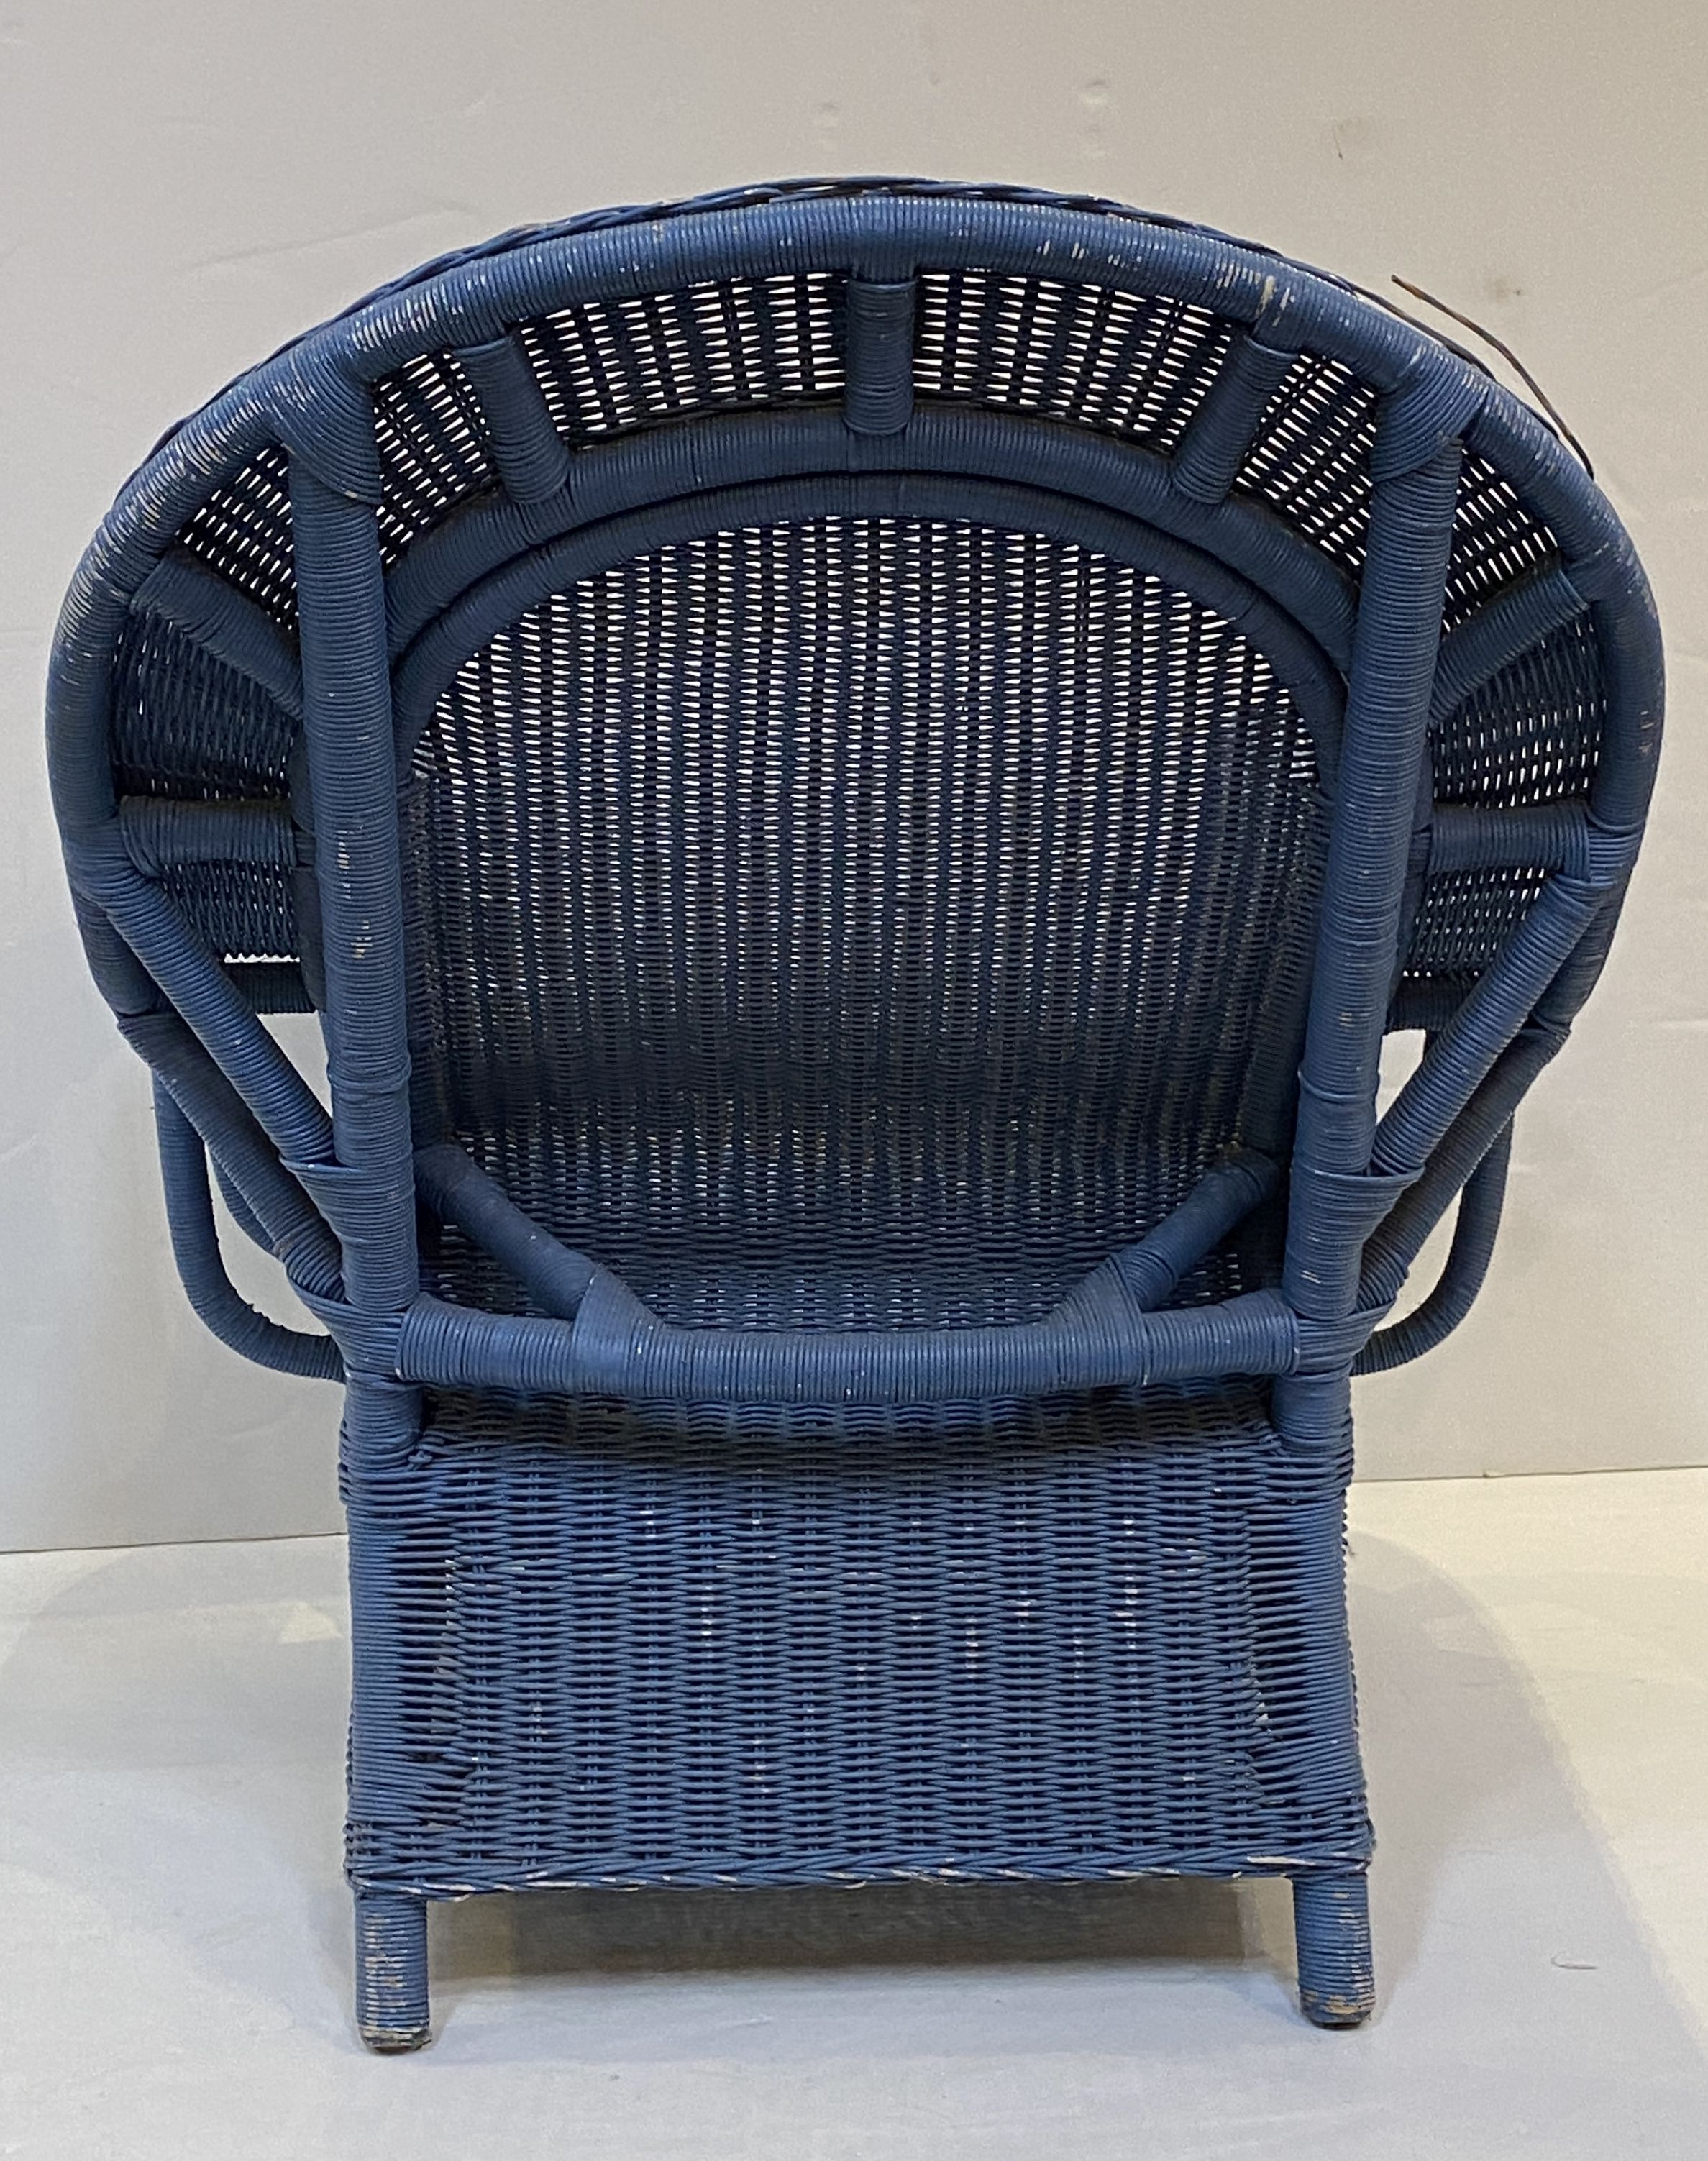 ee652_blue_chairs_13_540966568